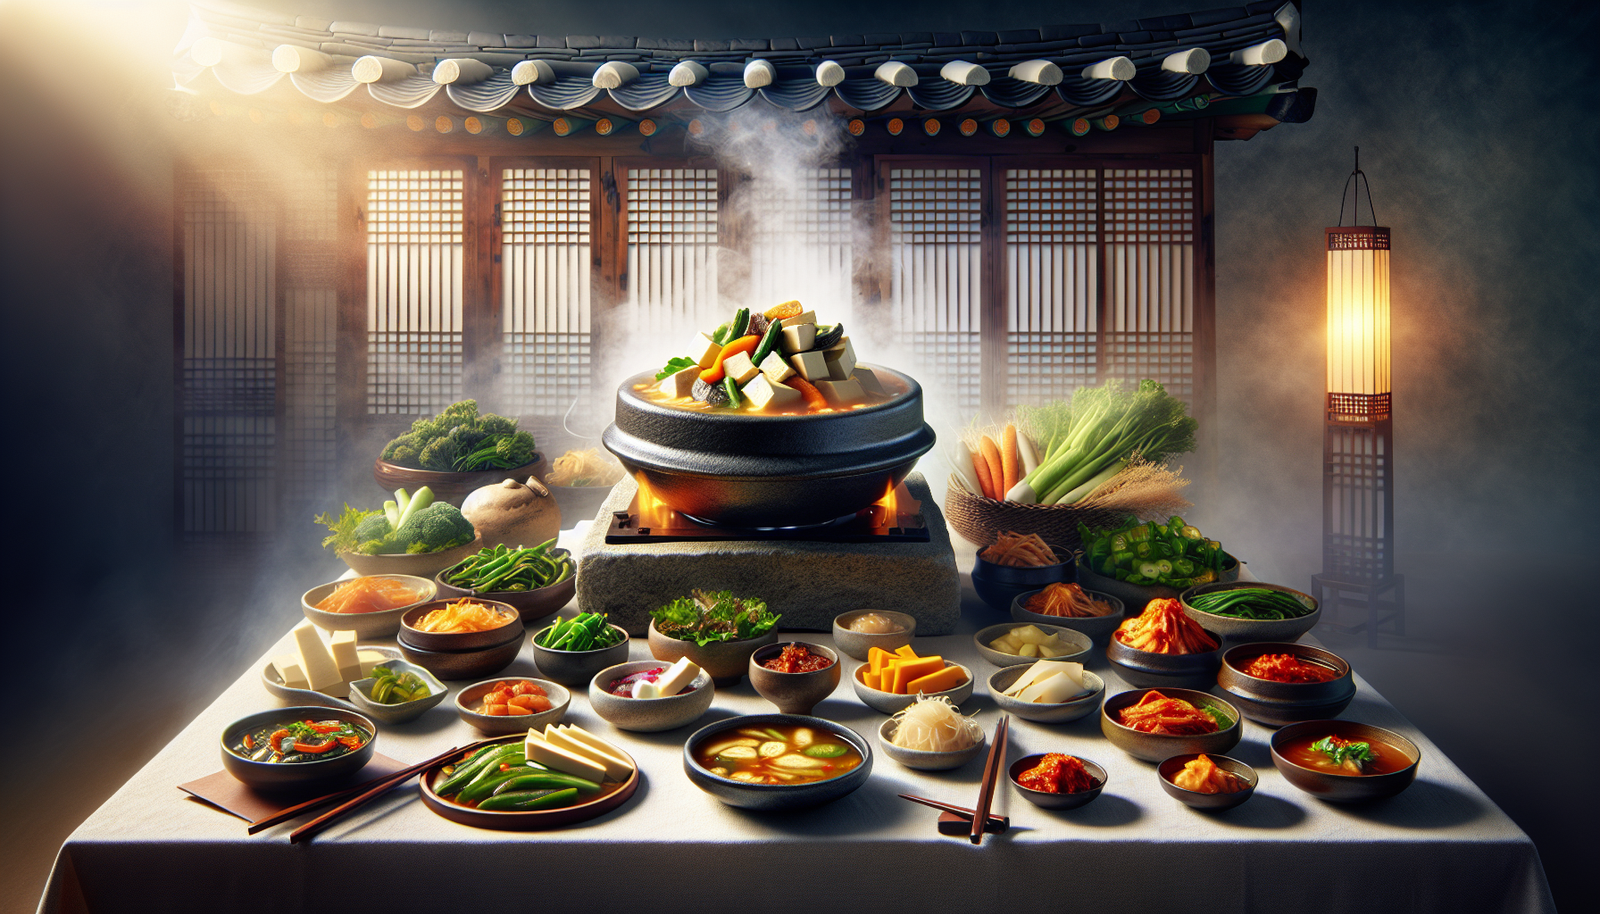 Can You Suggest Some Vegetarian-friendly Korean Dishes?